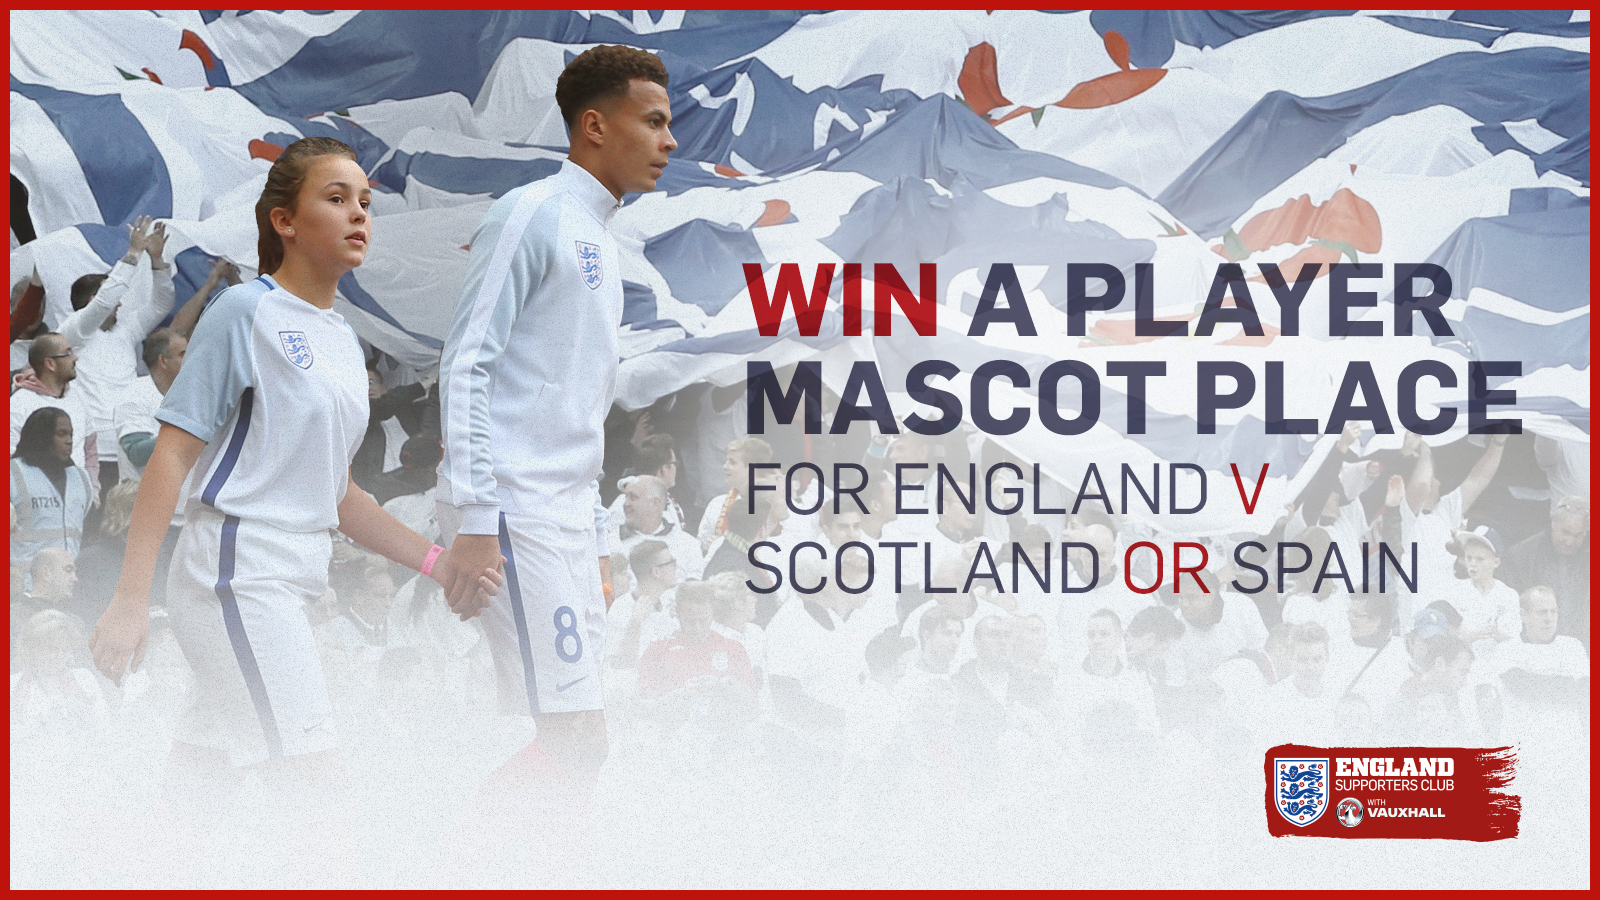 Player Mascot competition for Scotland & Spain